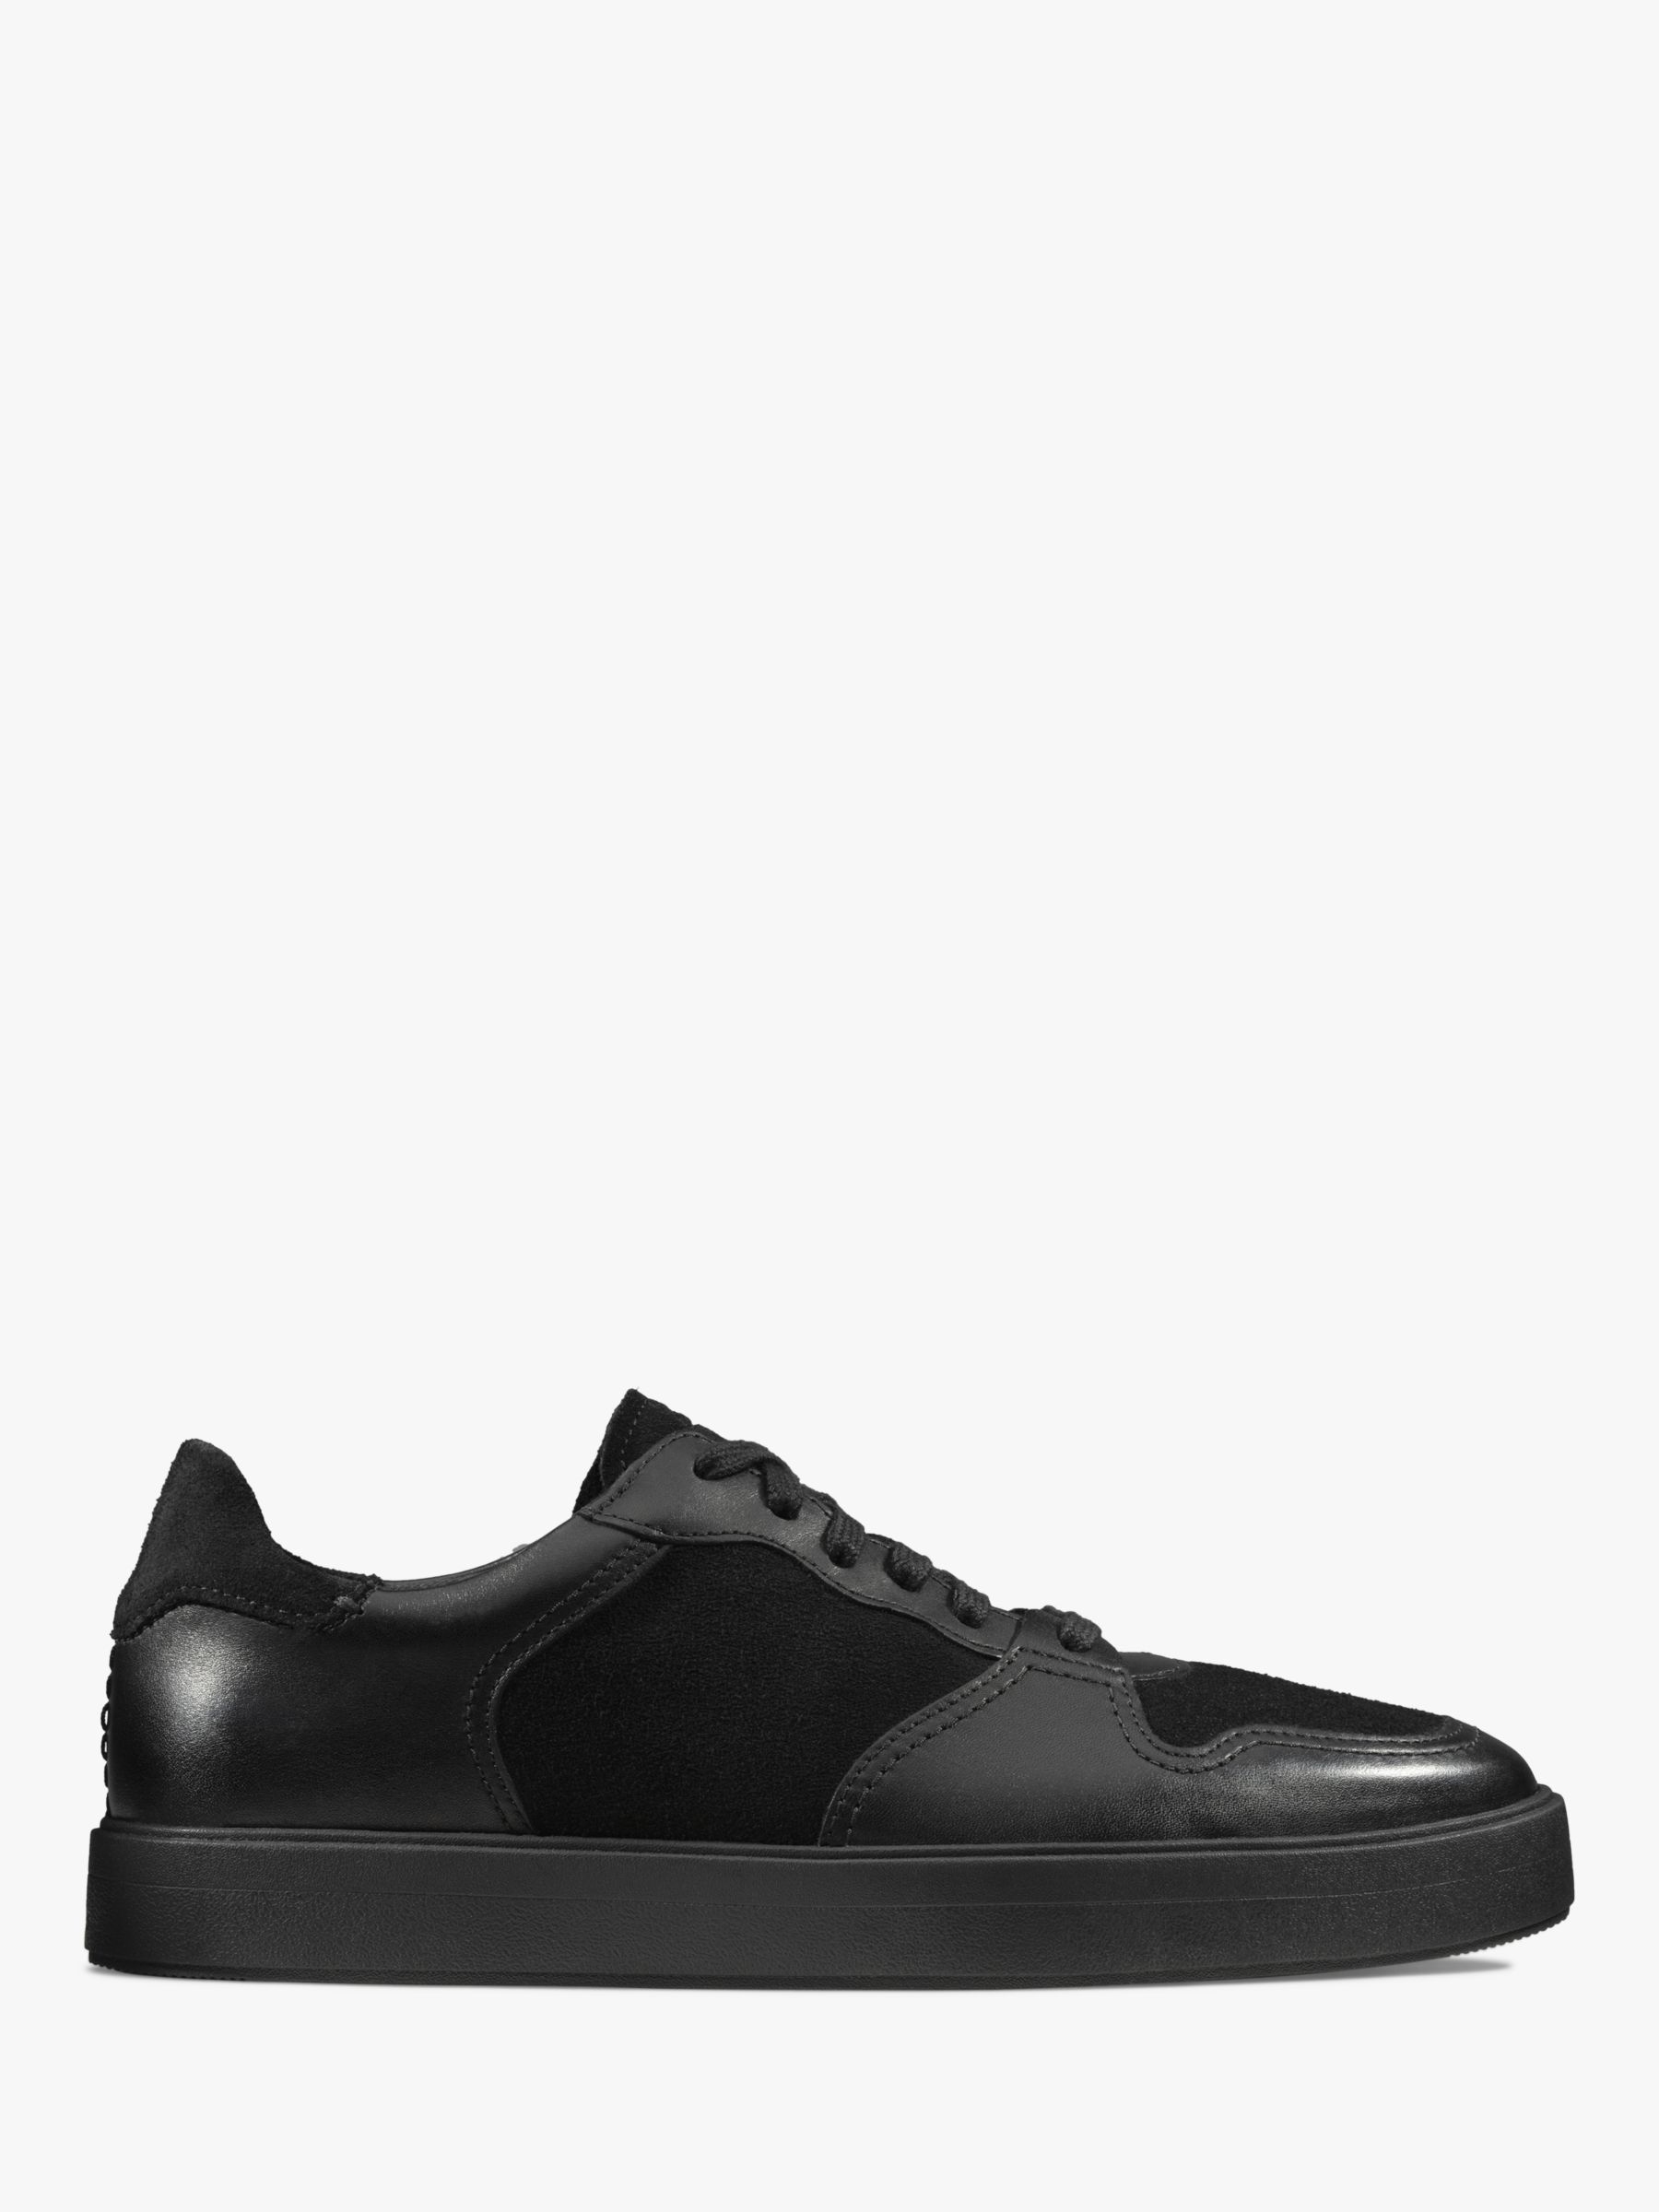 Clarks Hero Jump Leather Trainers, Black at John Lewis & Partners